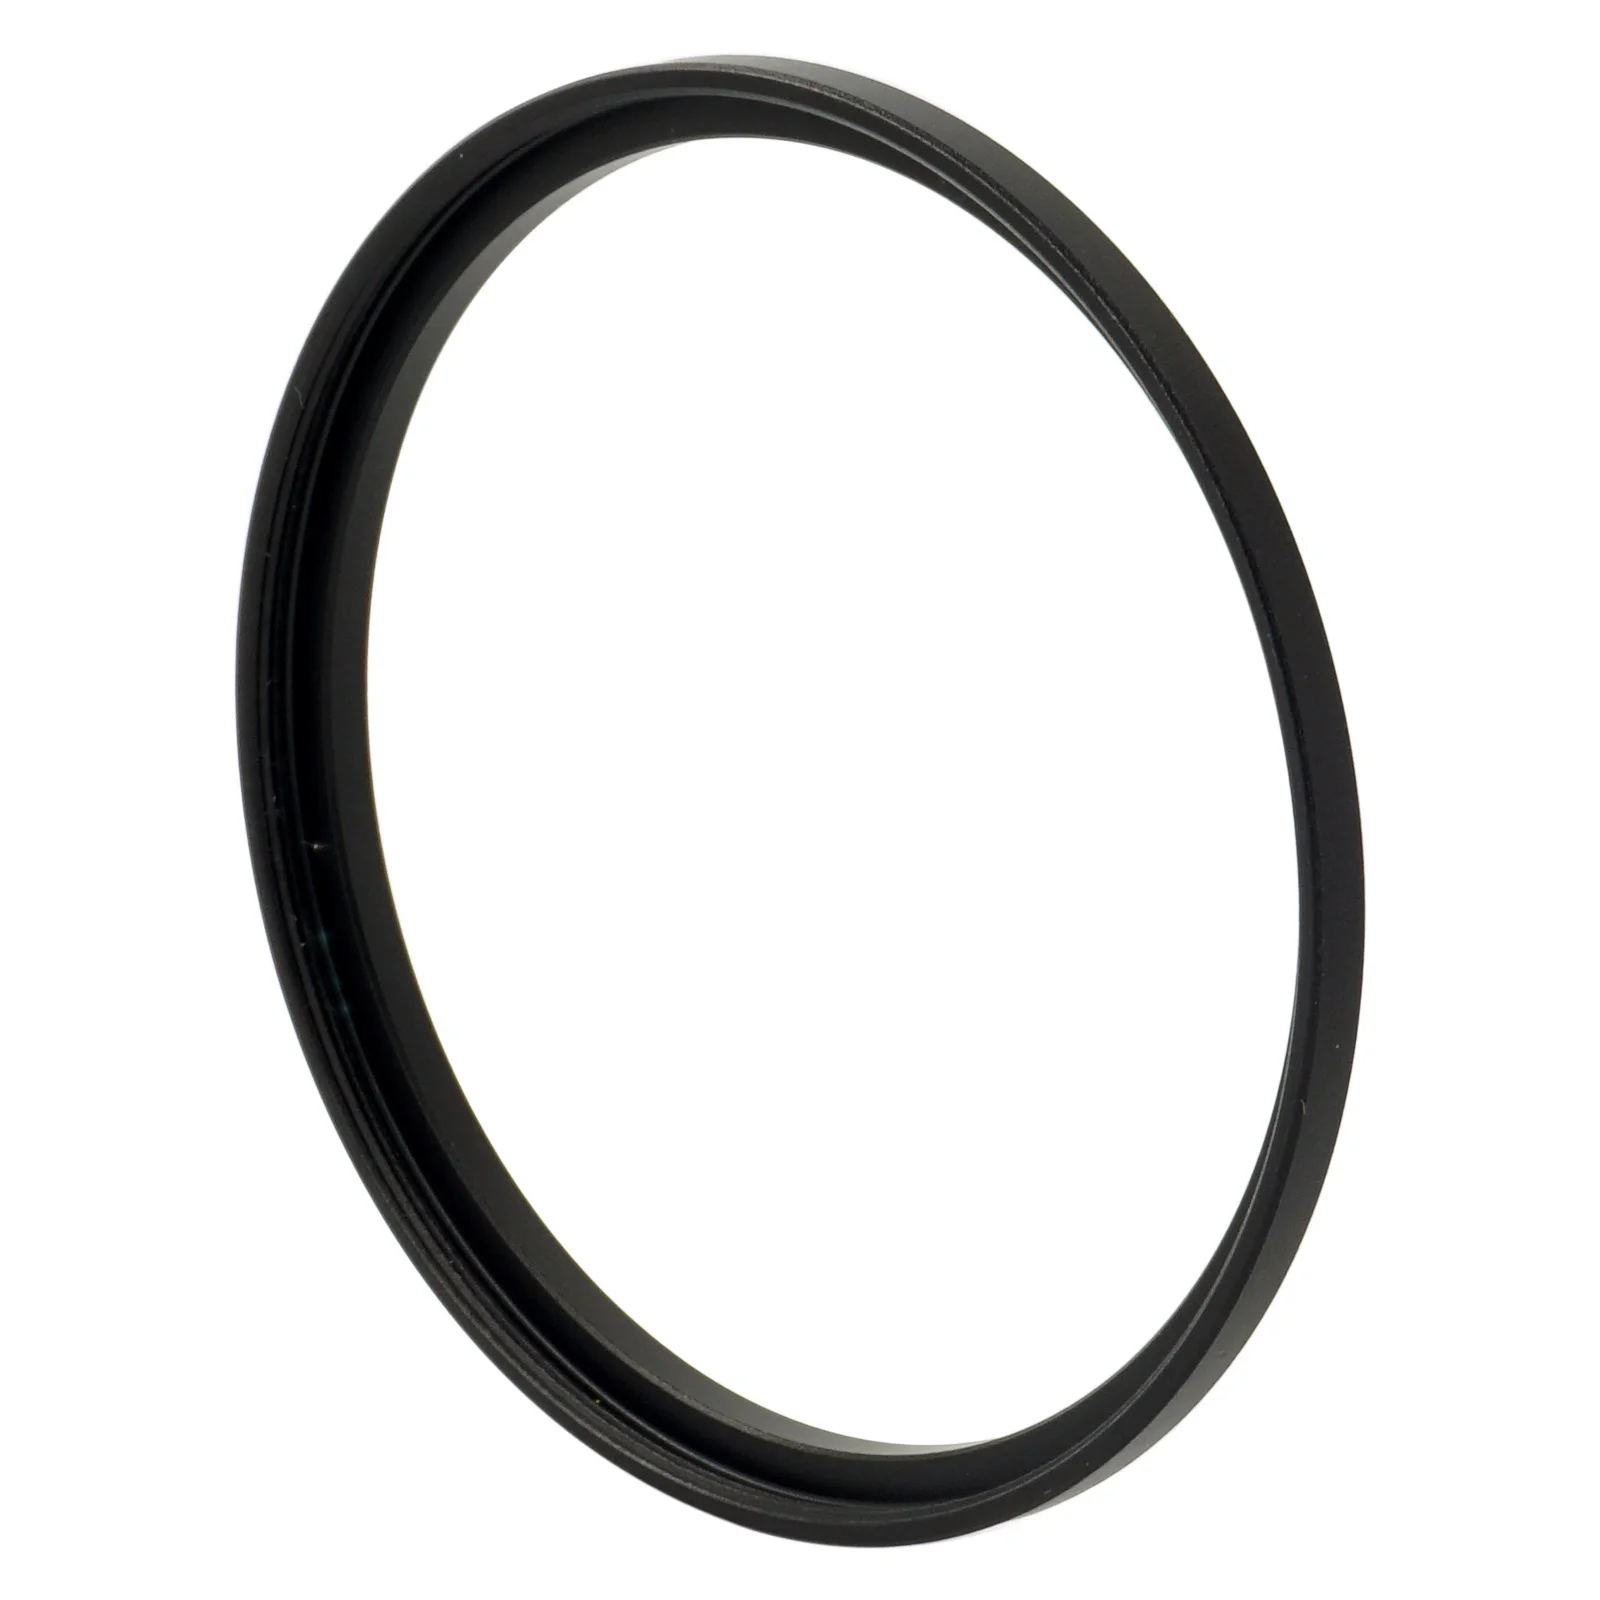 

65-67 Step up Filter Ring 65mm x0.75 Male to 67mm x0.75 Female Lens adapter